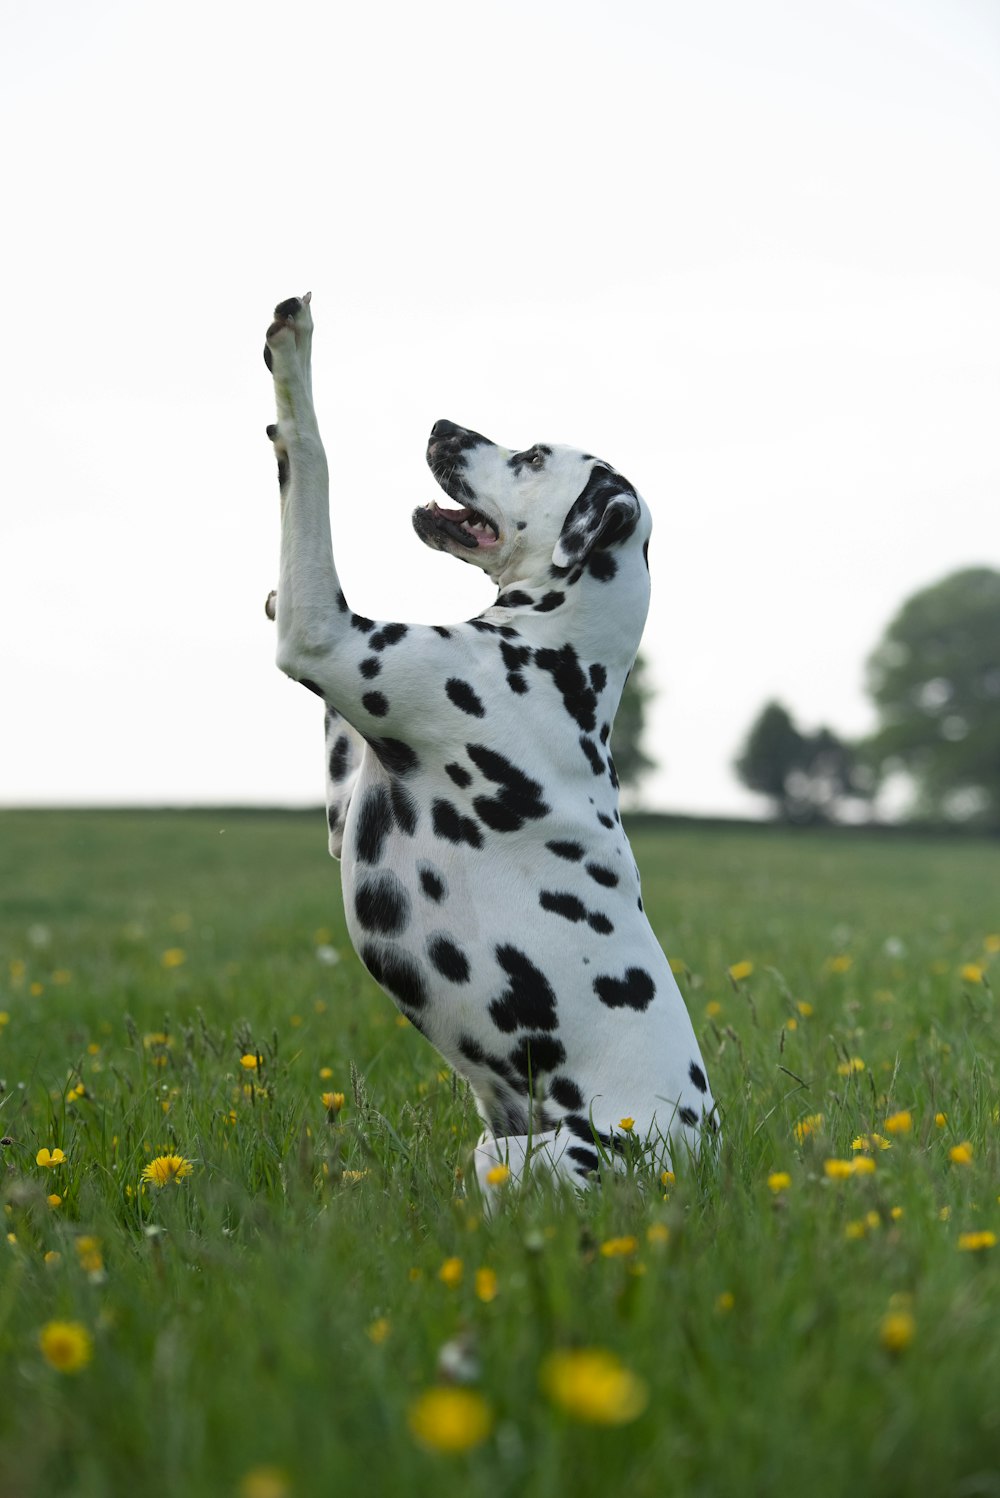 black and white dalmatian dog on green grass field during daytime